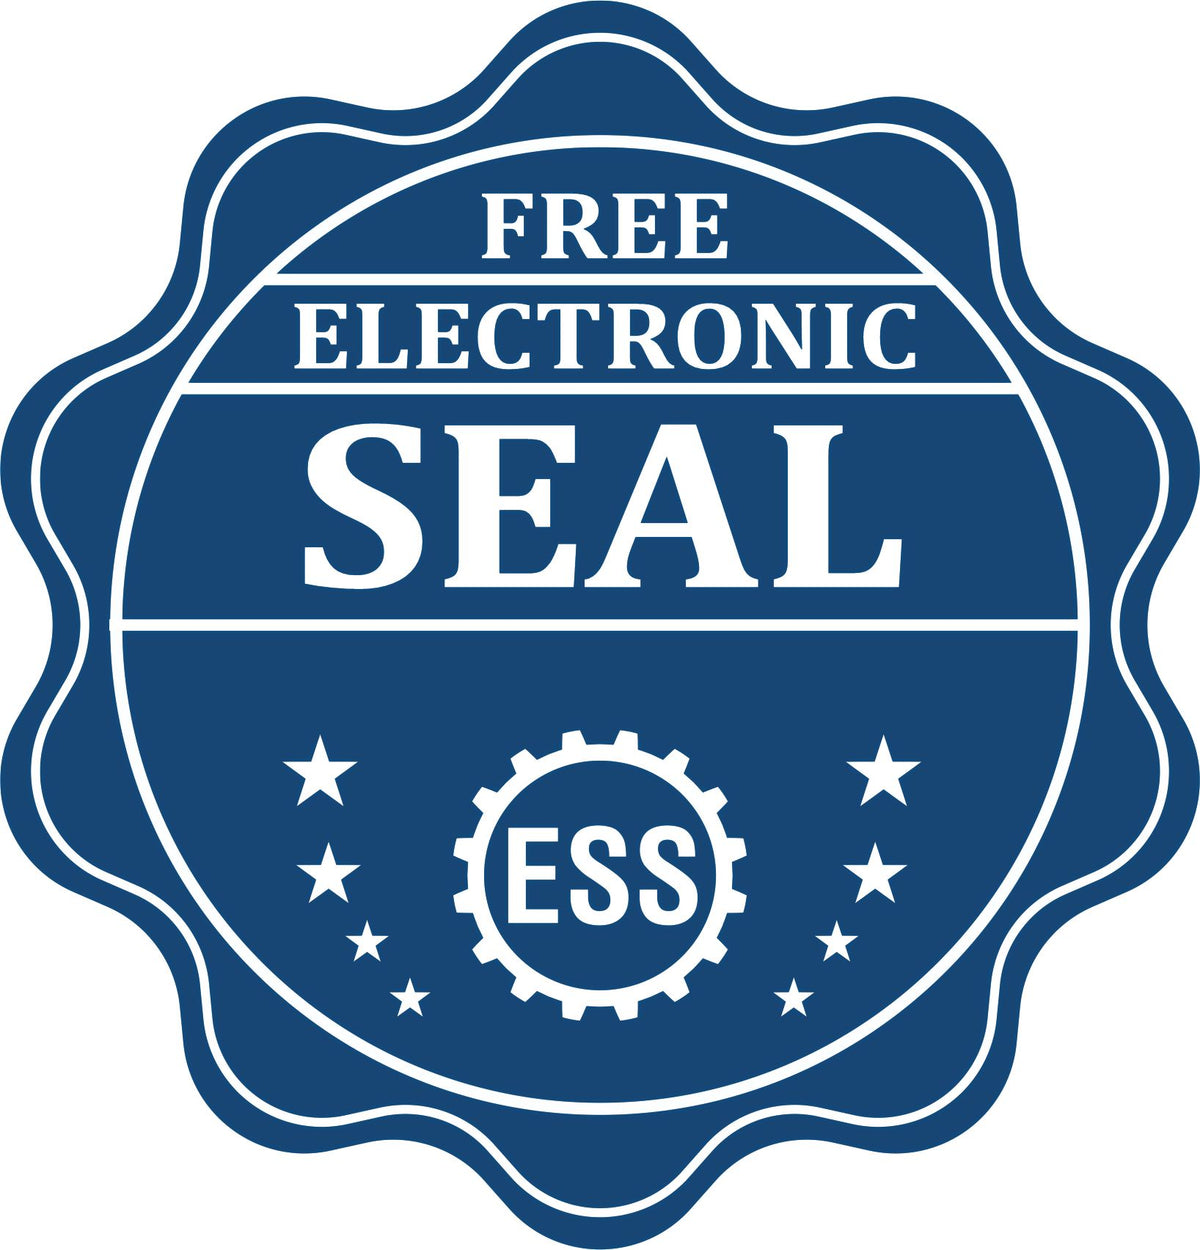 A badge showing a free electronic seal for the State of Indiana Extended Long Reach Engineer Seal with stars and the ESS gear on the emblem.